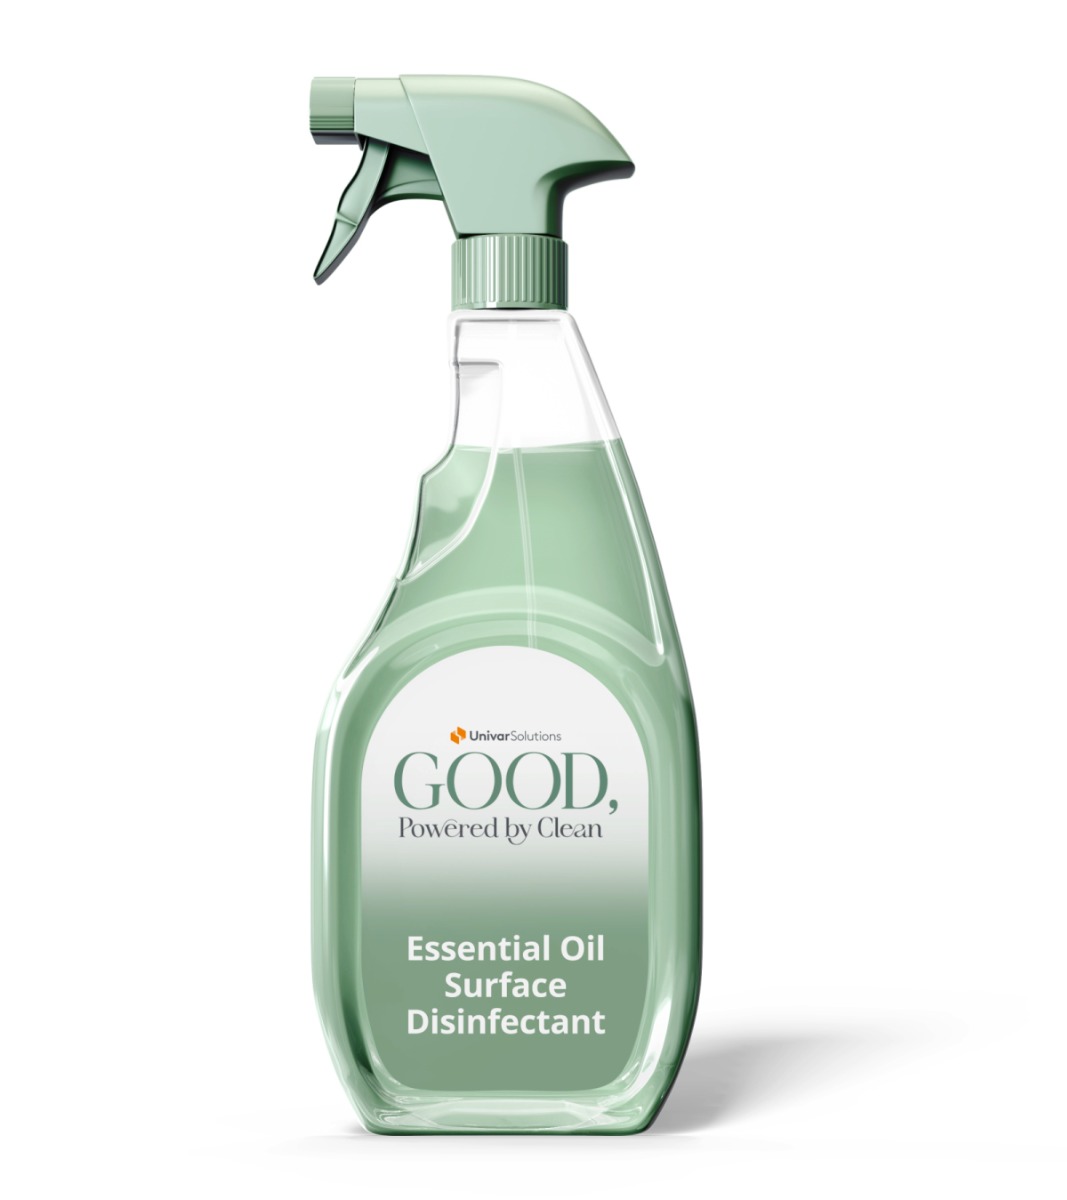 A bottle of Essential Oil Multi-Surface Disinfectant